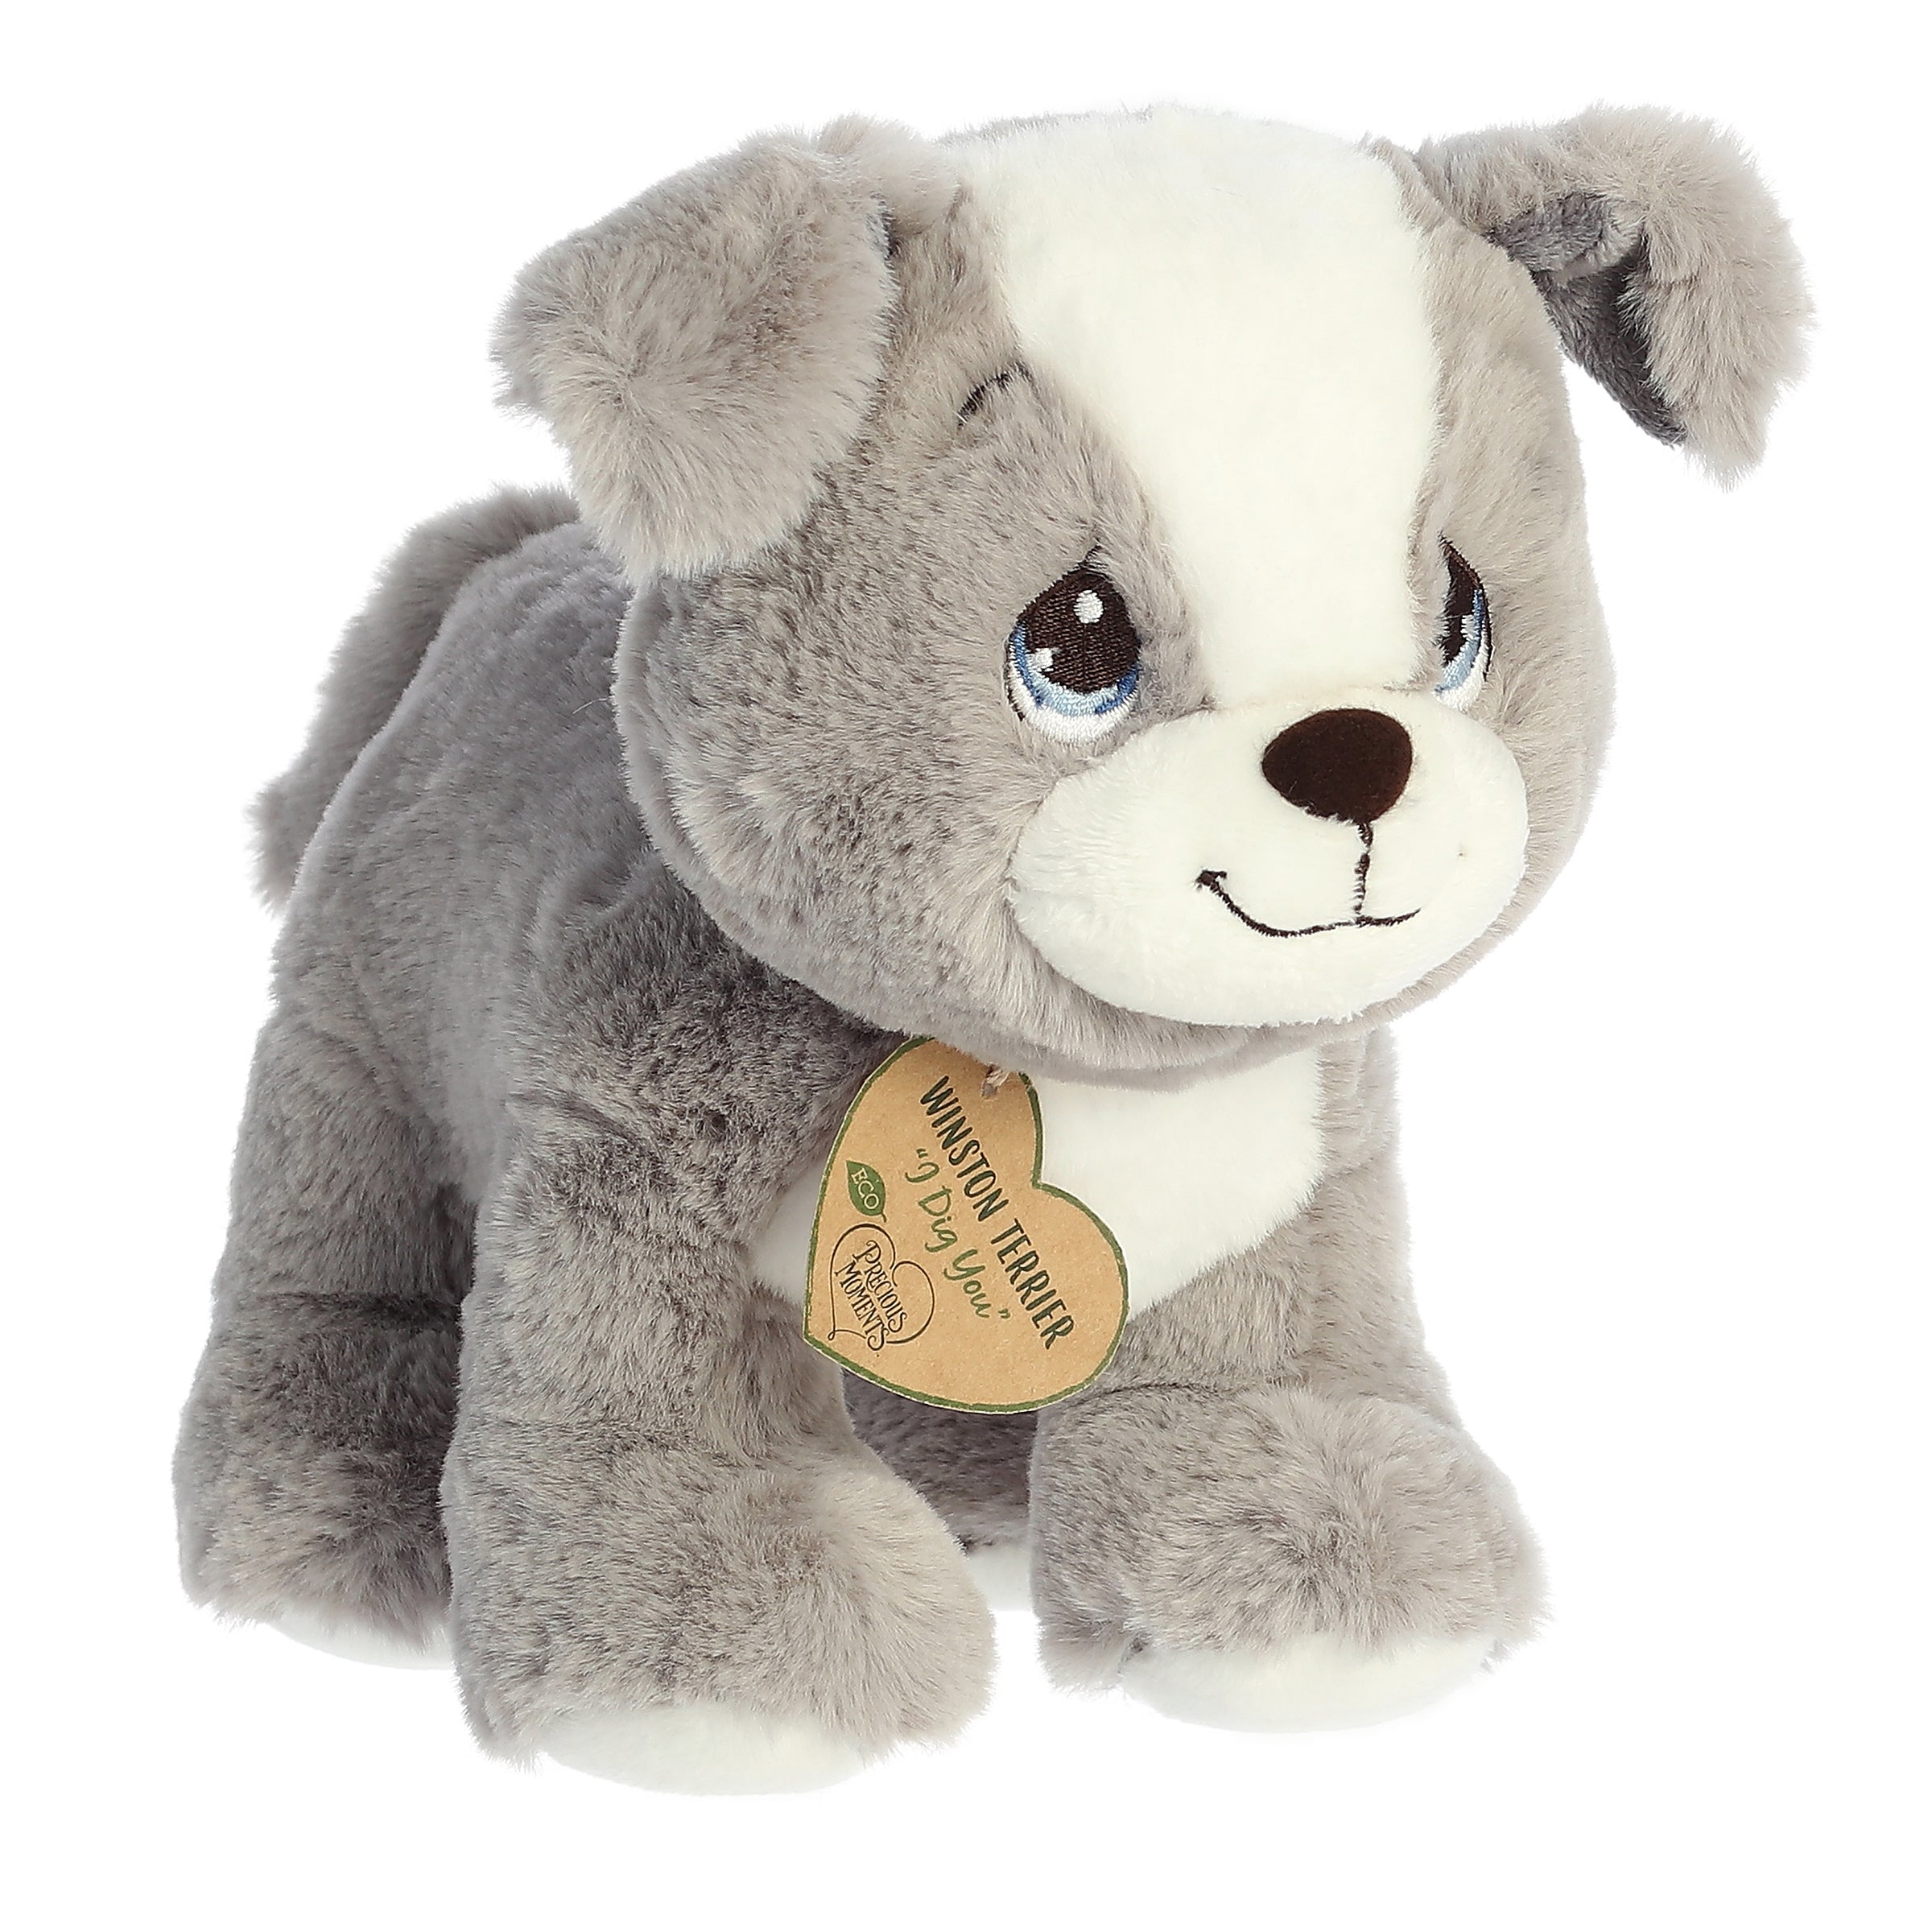 An eco-friendly gray and white terrier dog plush with tear-drop eyes and a precious moments inspirational tag on its neck.